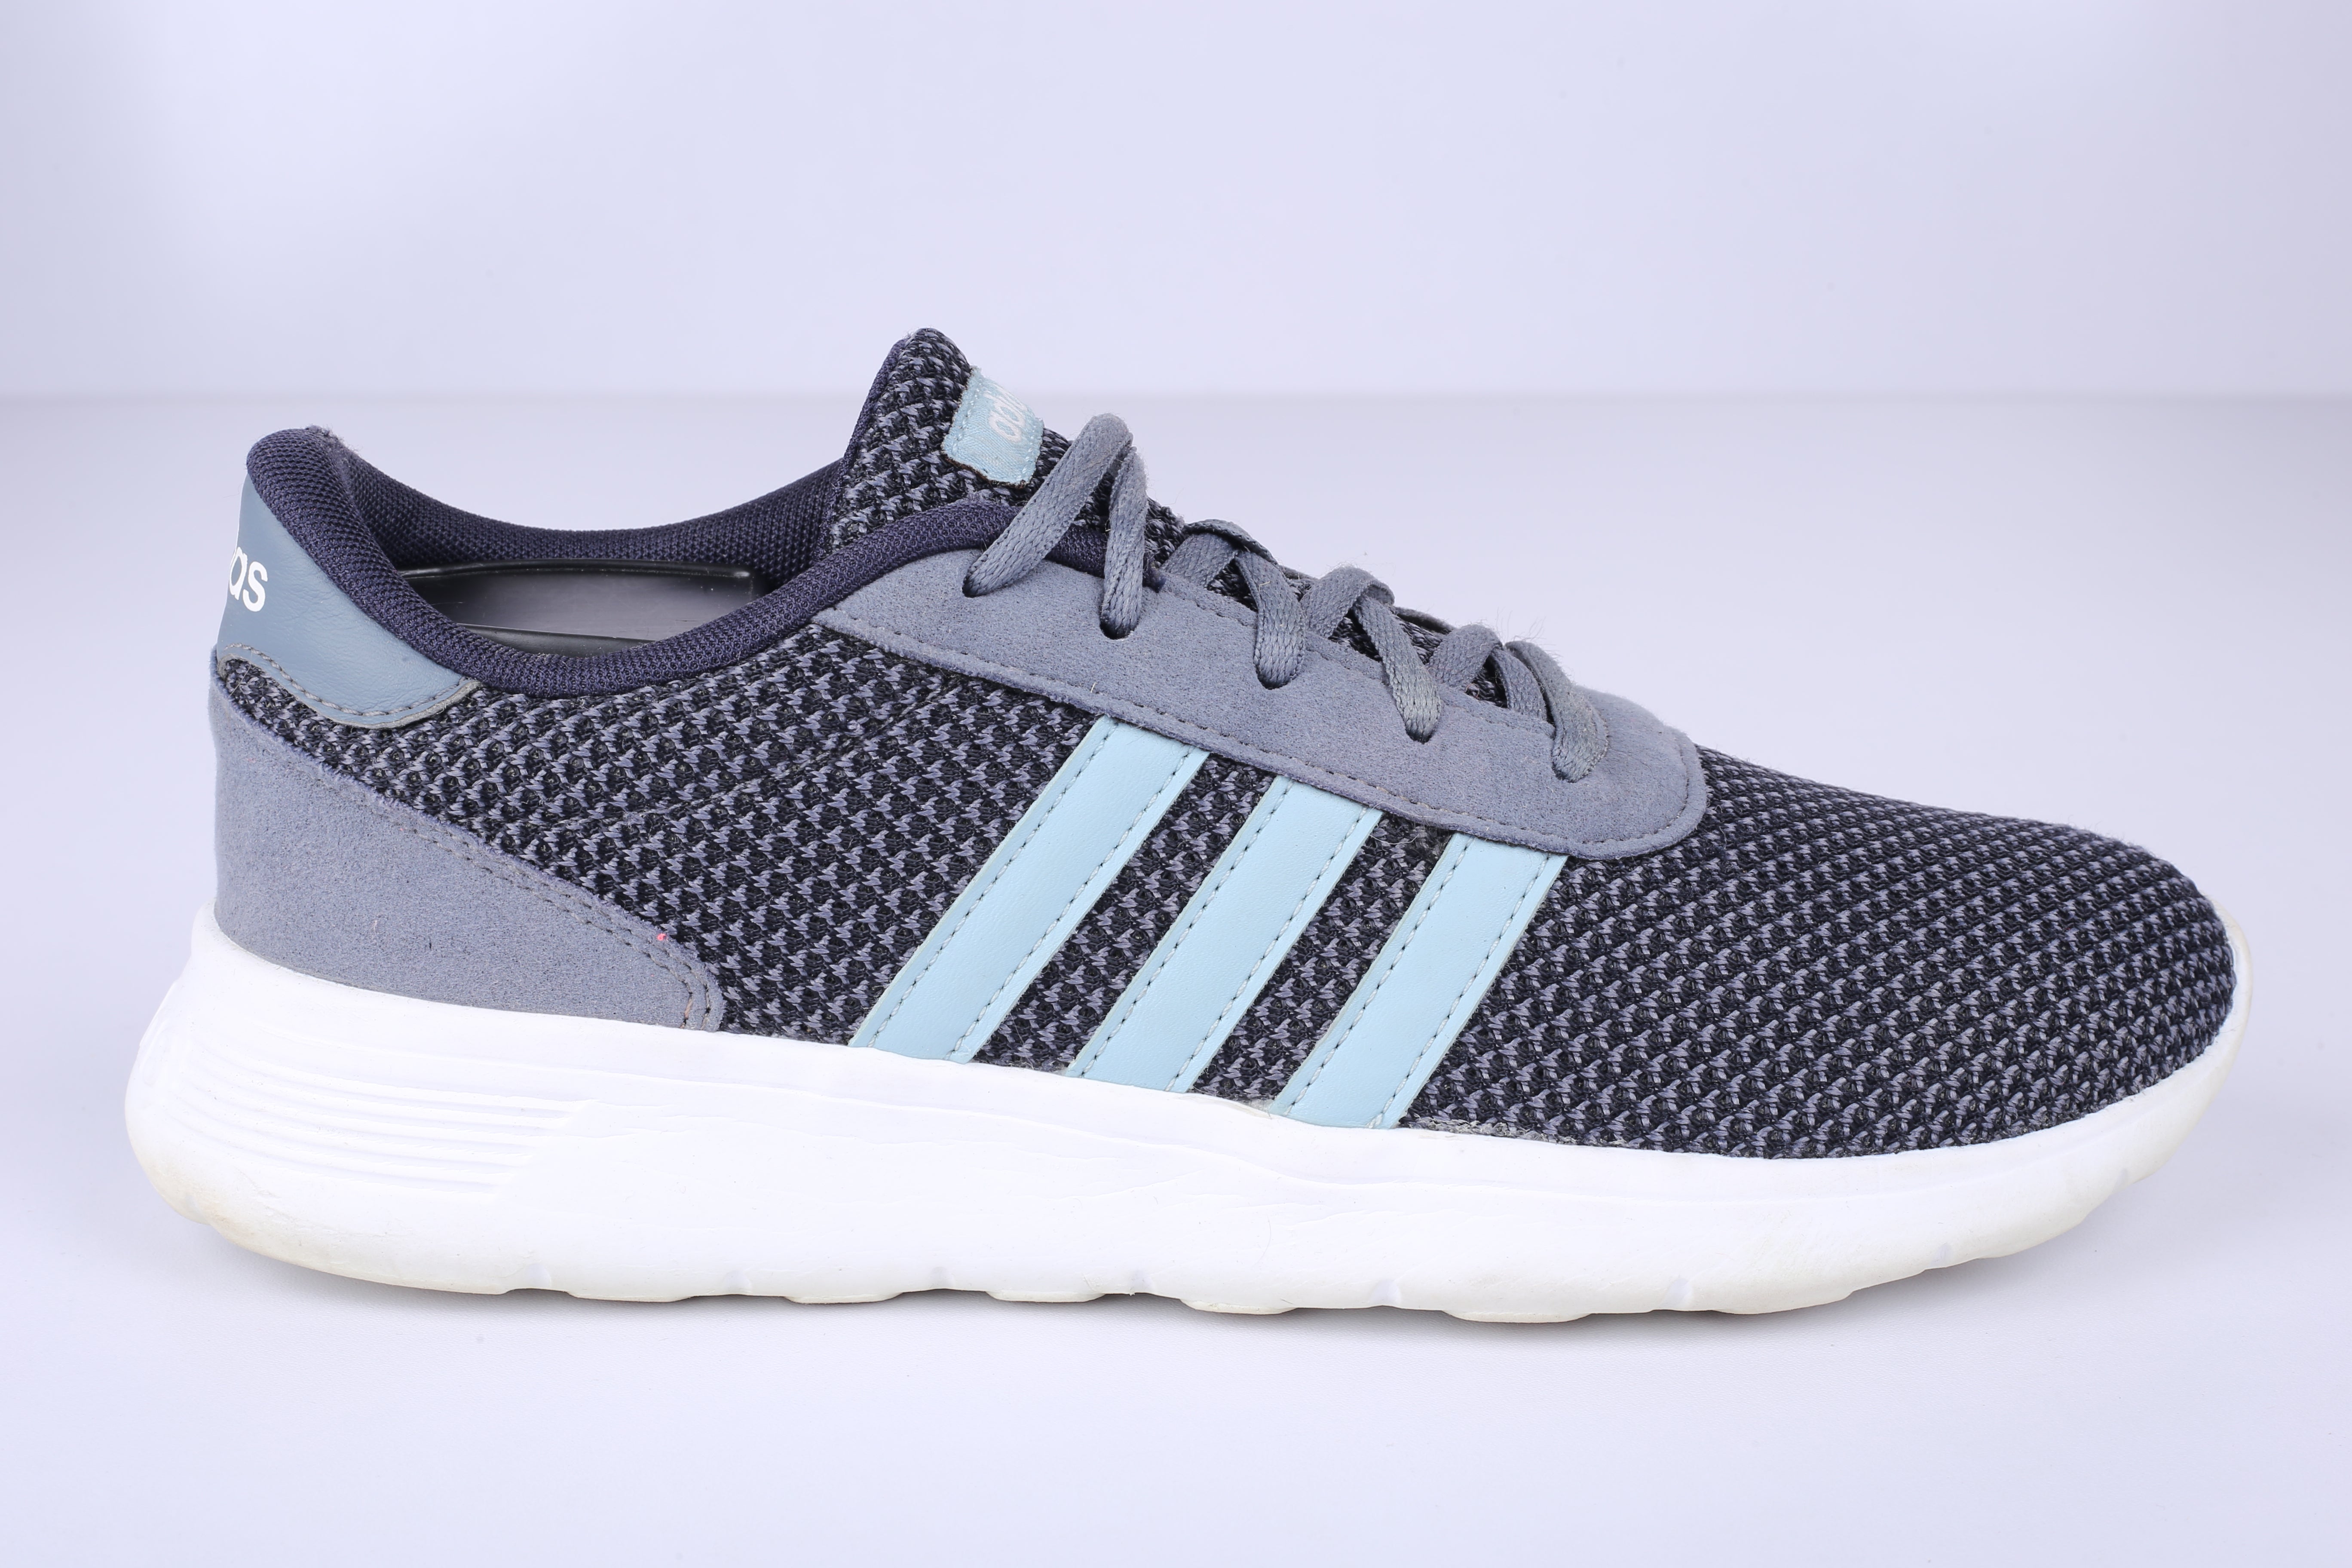 Adidas Cloud Foam Running - (Condition Excellent)